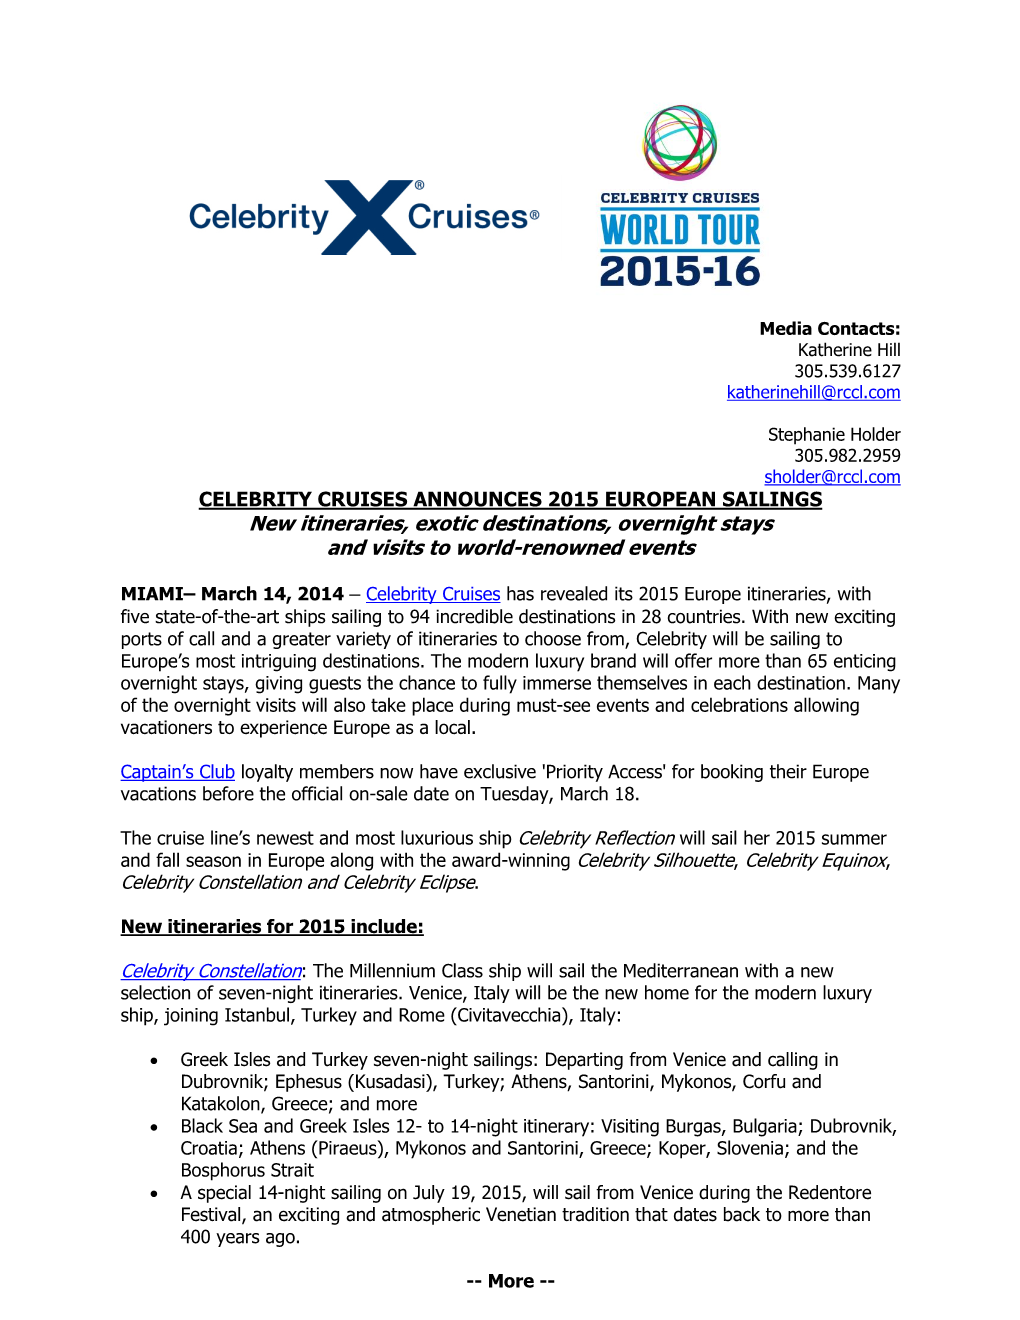 CELEBRITY CRUISES ANNOUNCES 2015 EUROPEAN SAILINGS New Itineraries, Exotic Destinations, Overnight Stays and Visits to World-Renowned Events